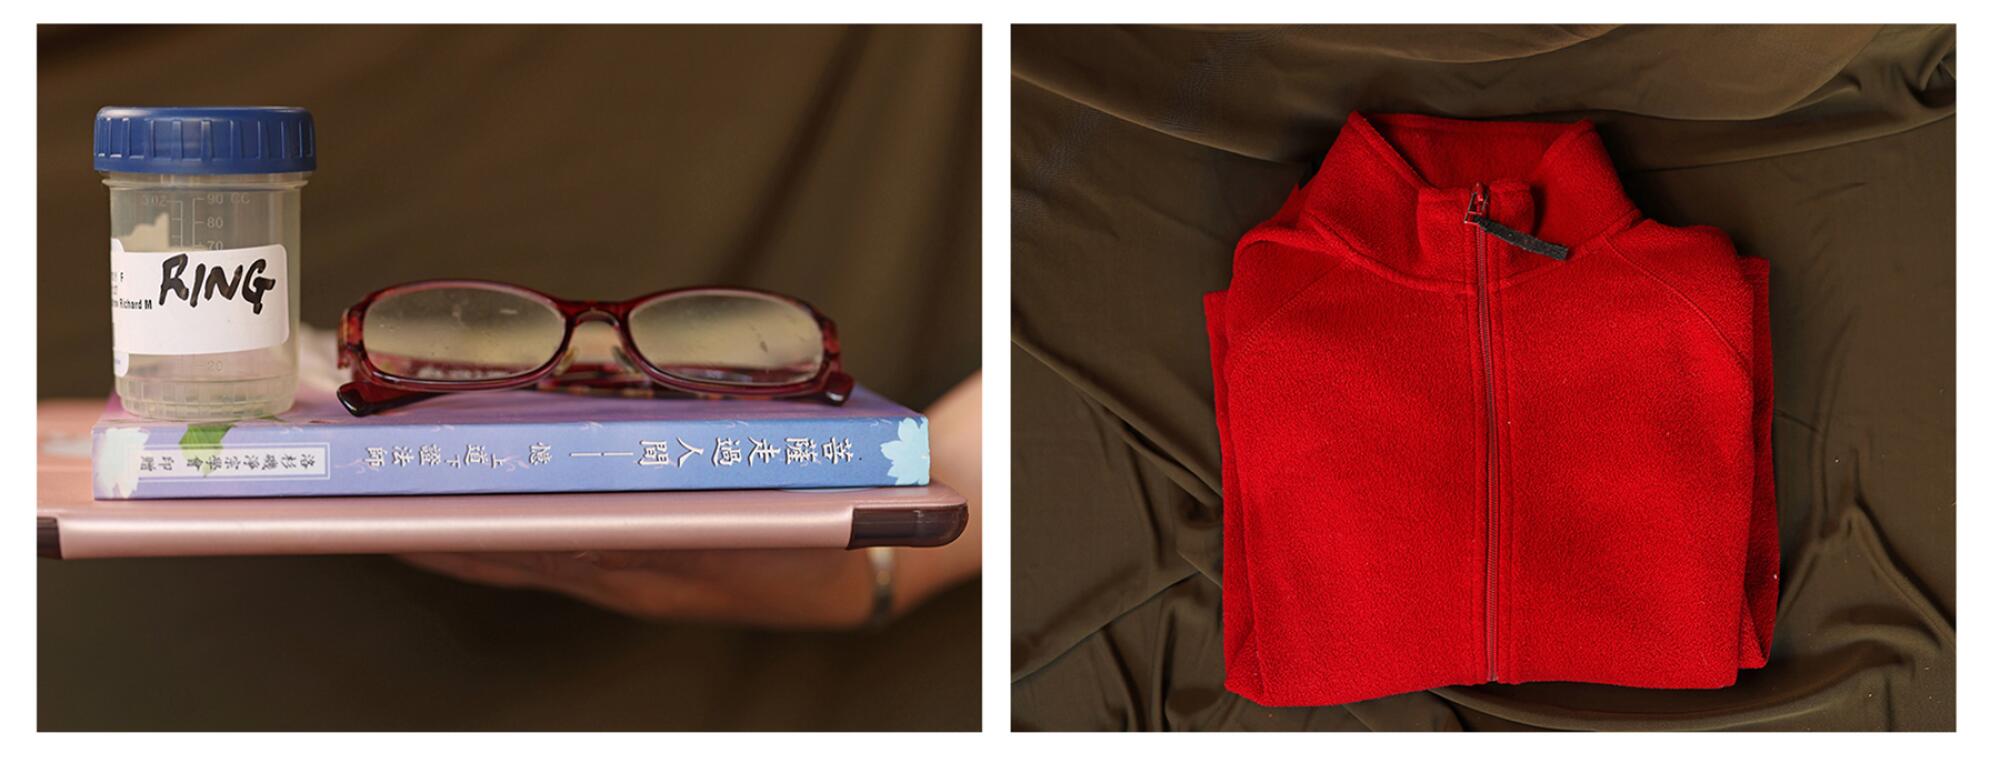 Two photos: a small plastic cup and glasses sitting on top of a book, and a red zip-up sweater